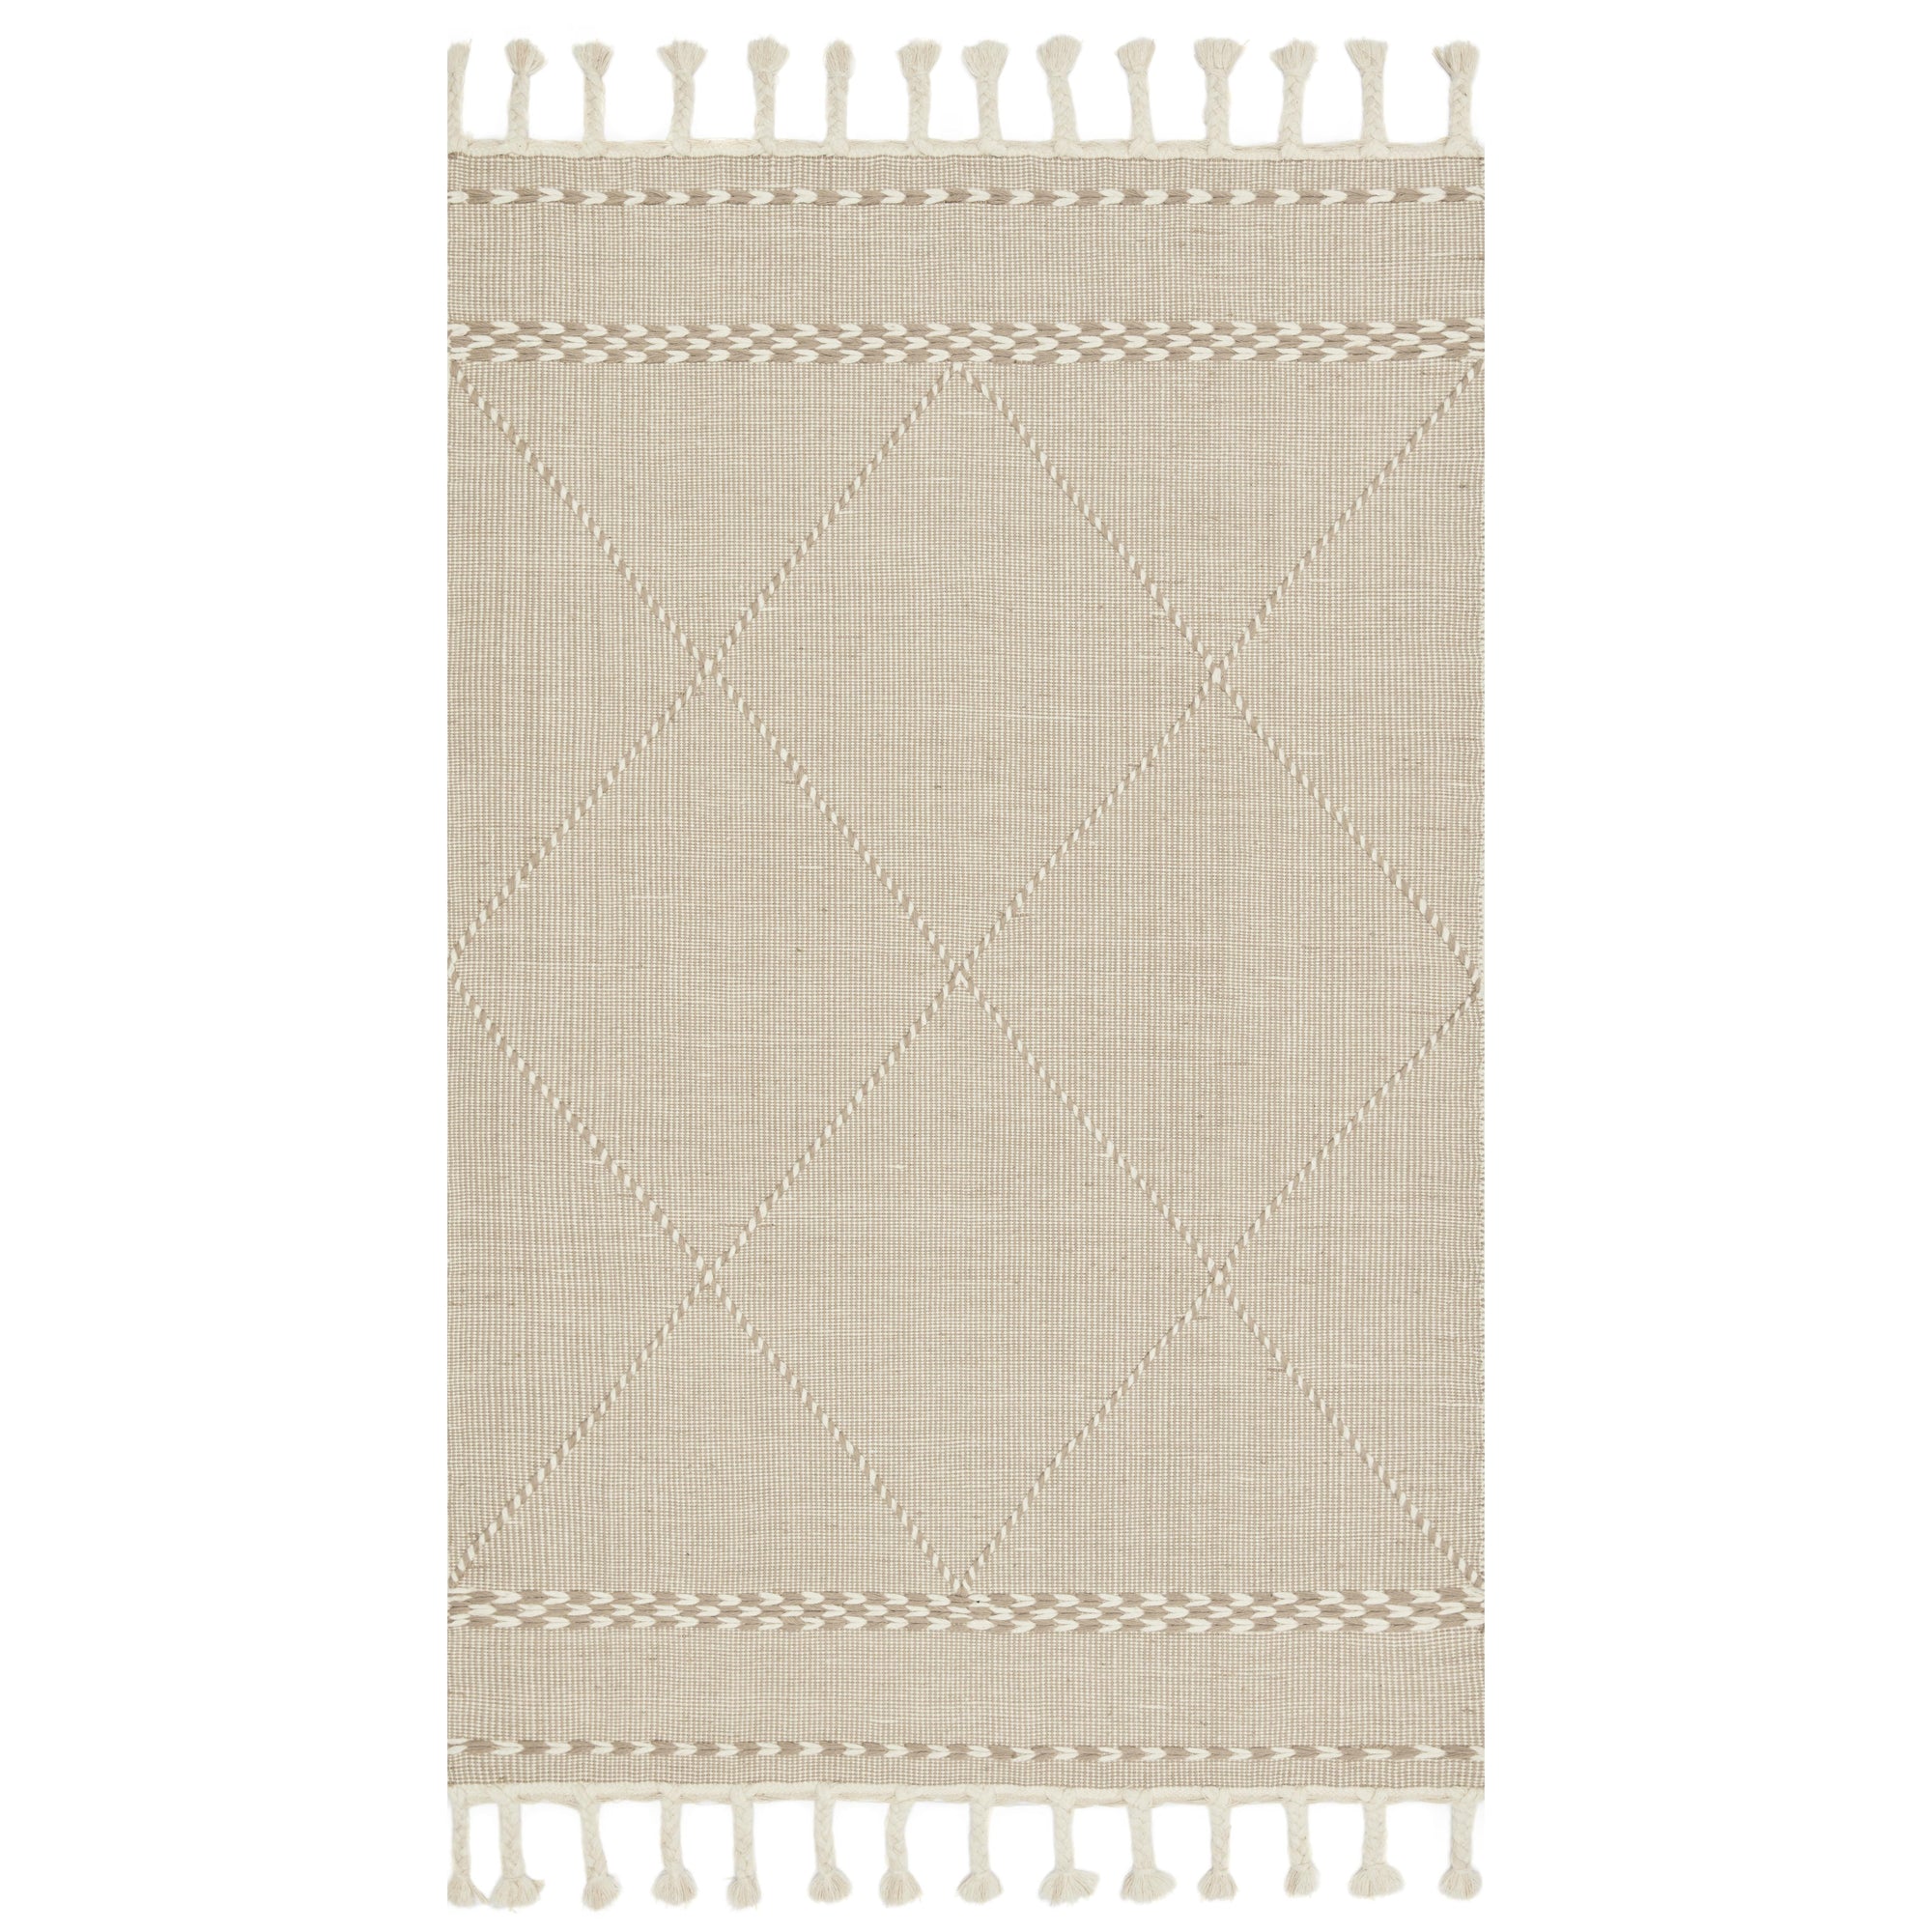 Rugs by Roo Loloi Sawyer Sand Area Rug in size 18" x 18" Sample